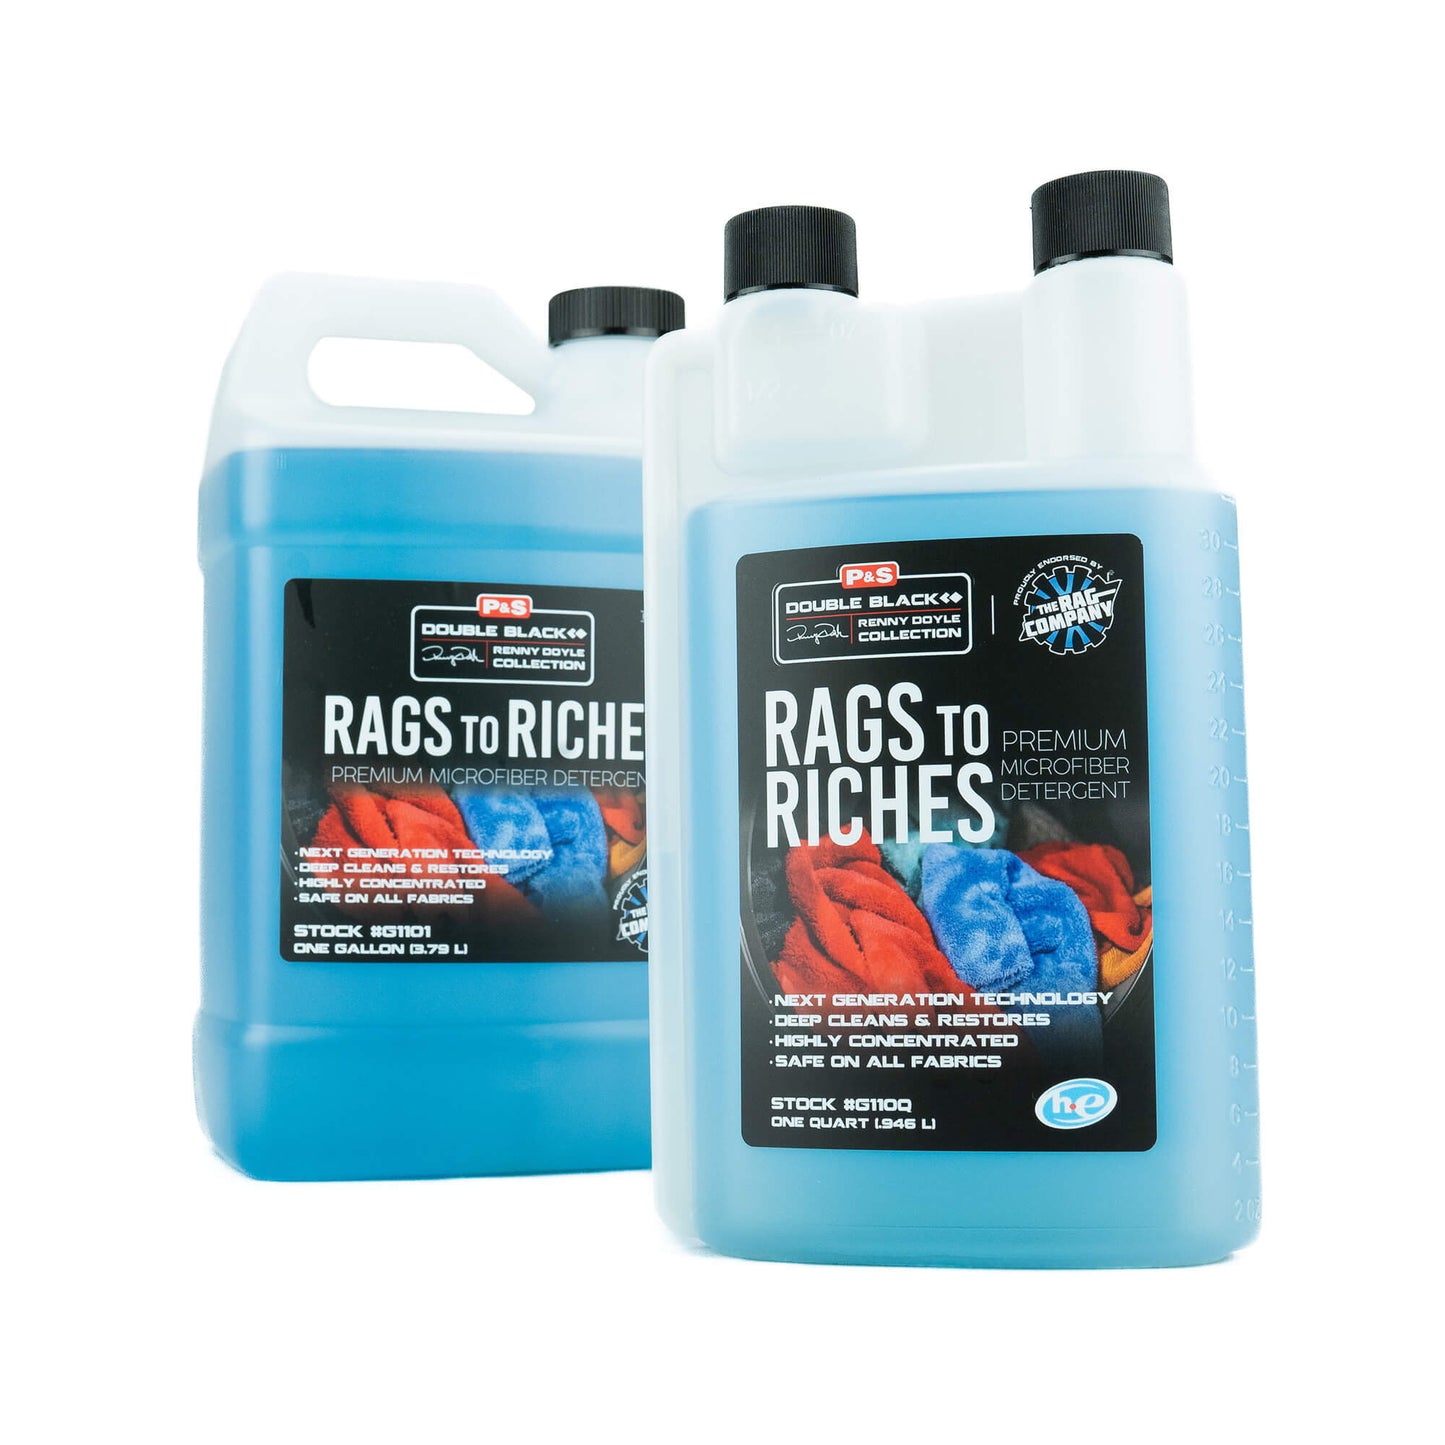 P&S Rags To Riches Microfiber Detergent 946ml